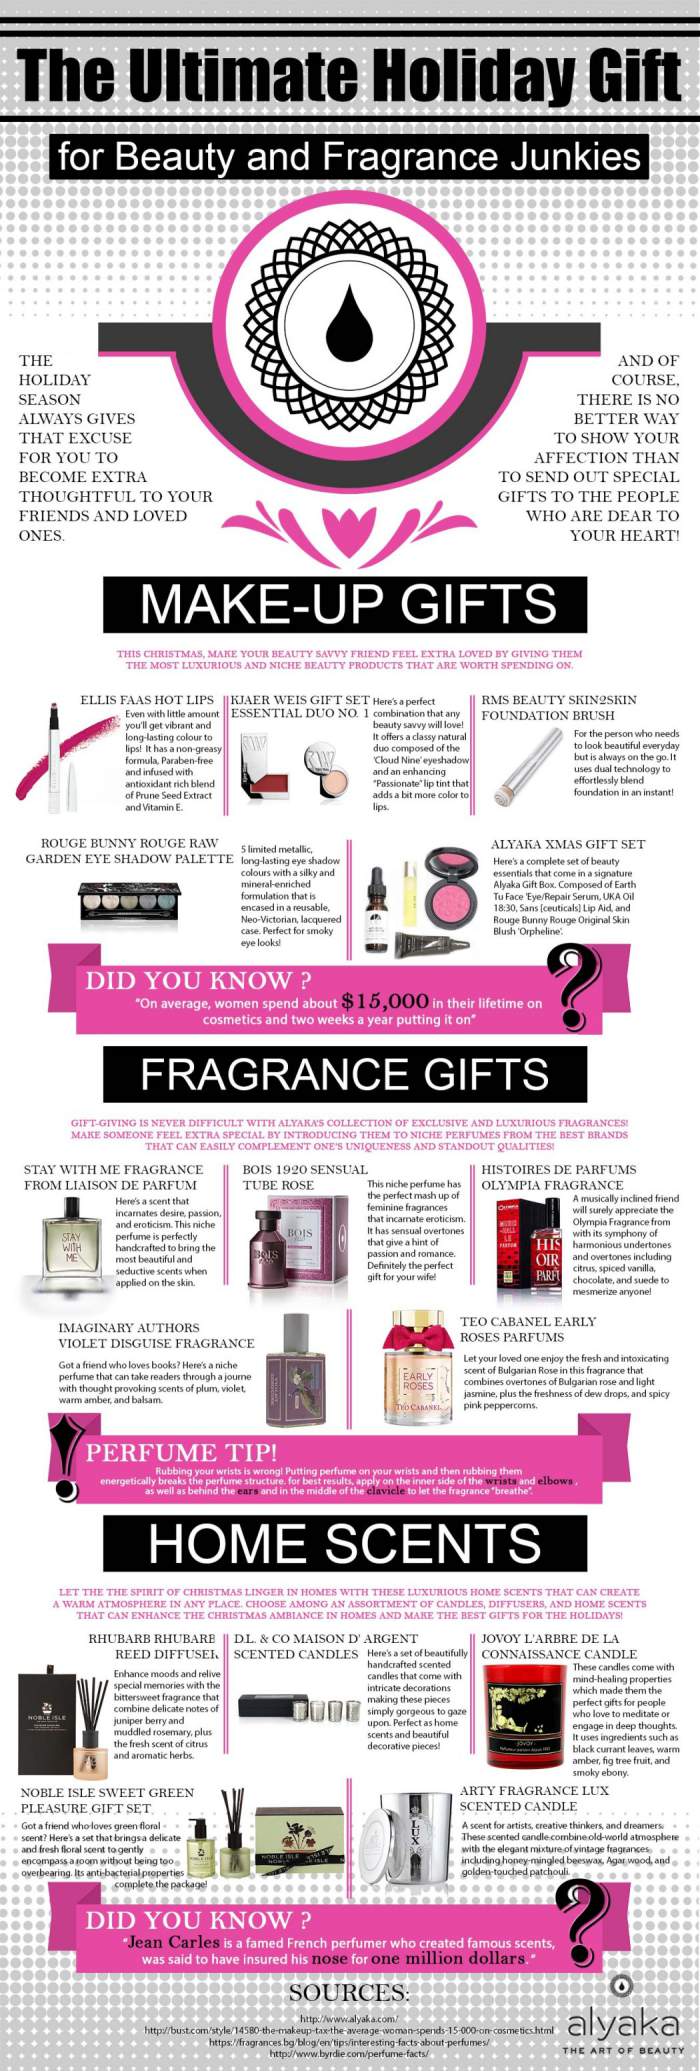 Holiday Gift Guide for Beauty and Fragrance Junkies